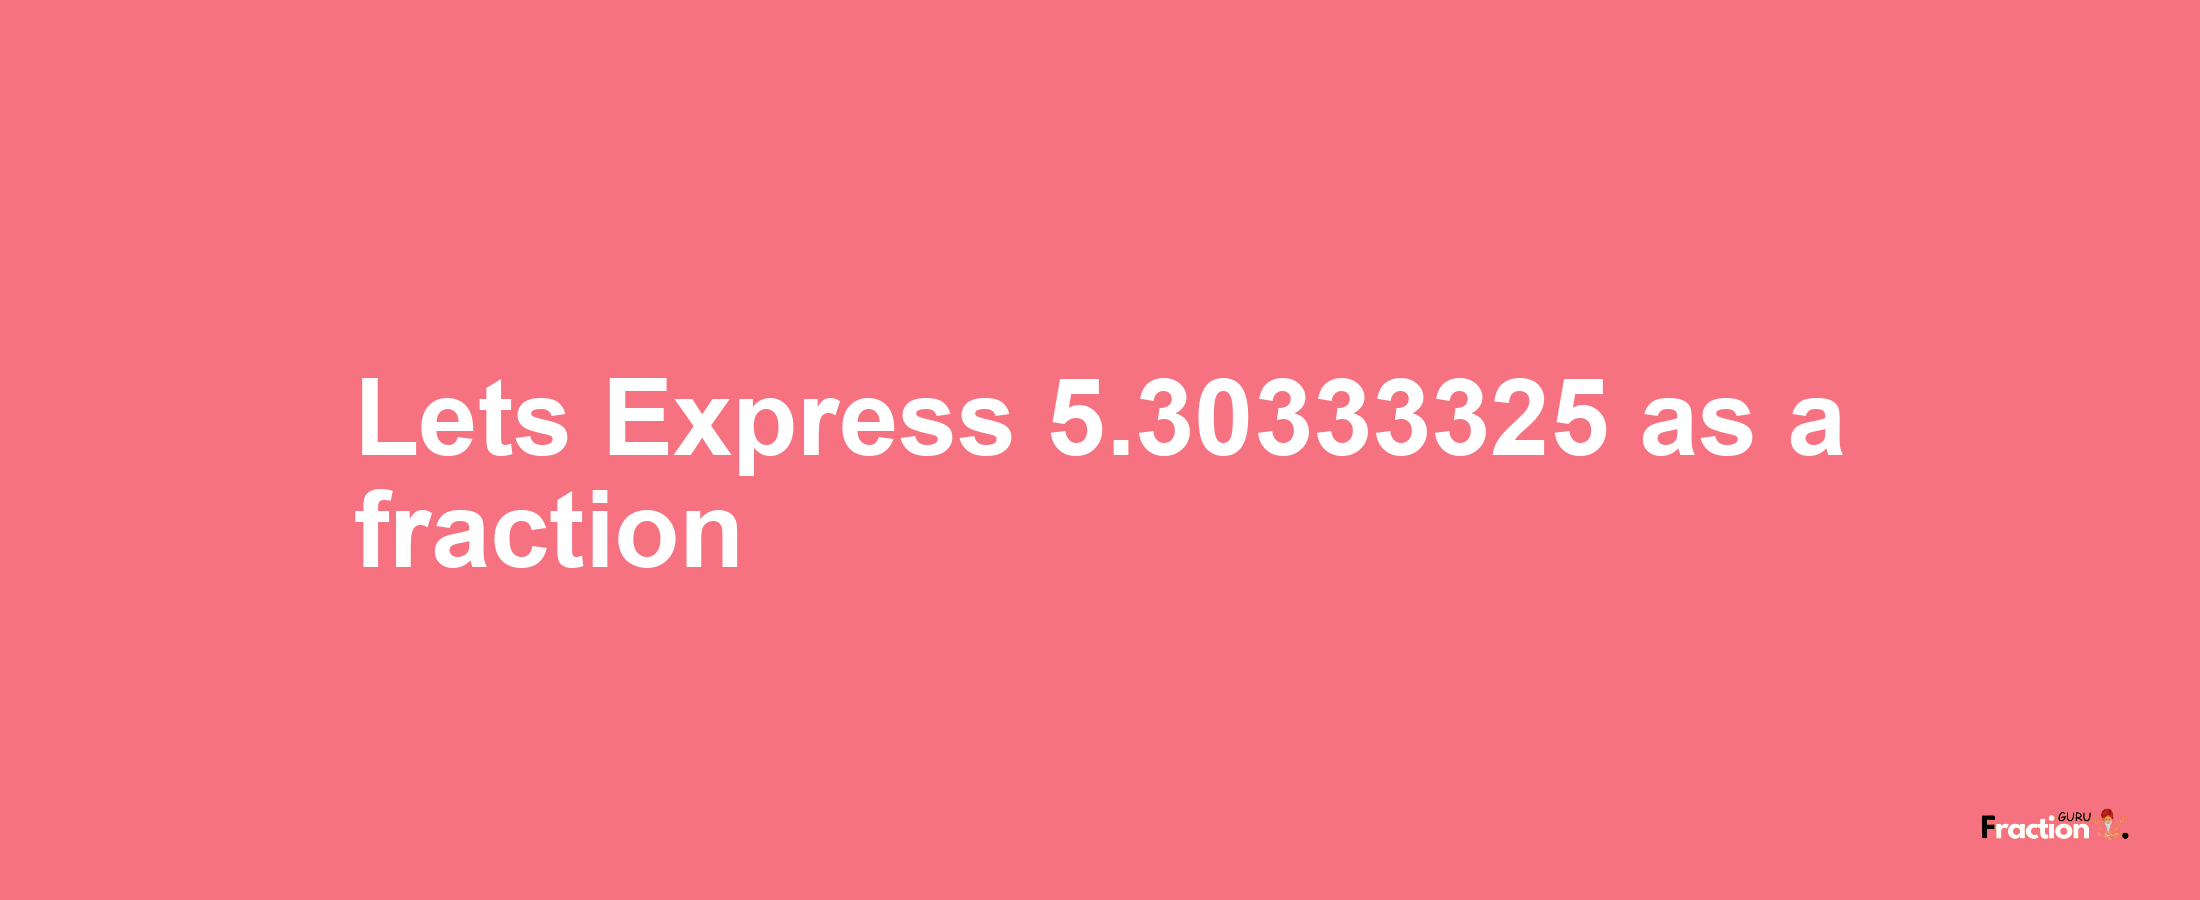 Lets Express 5.30333325 as afraction